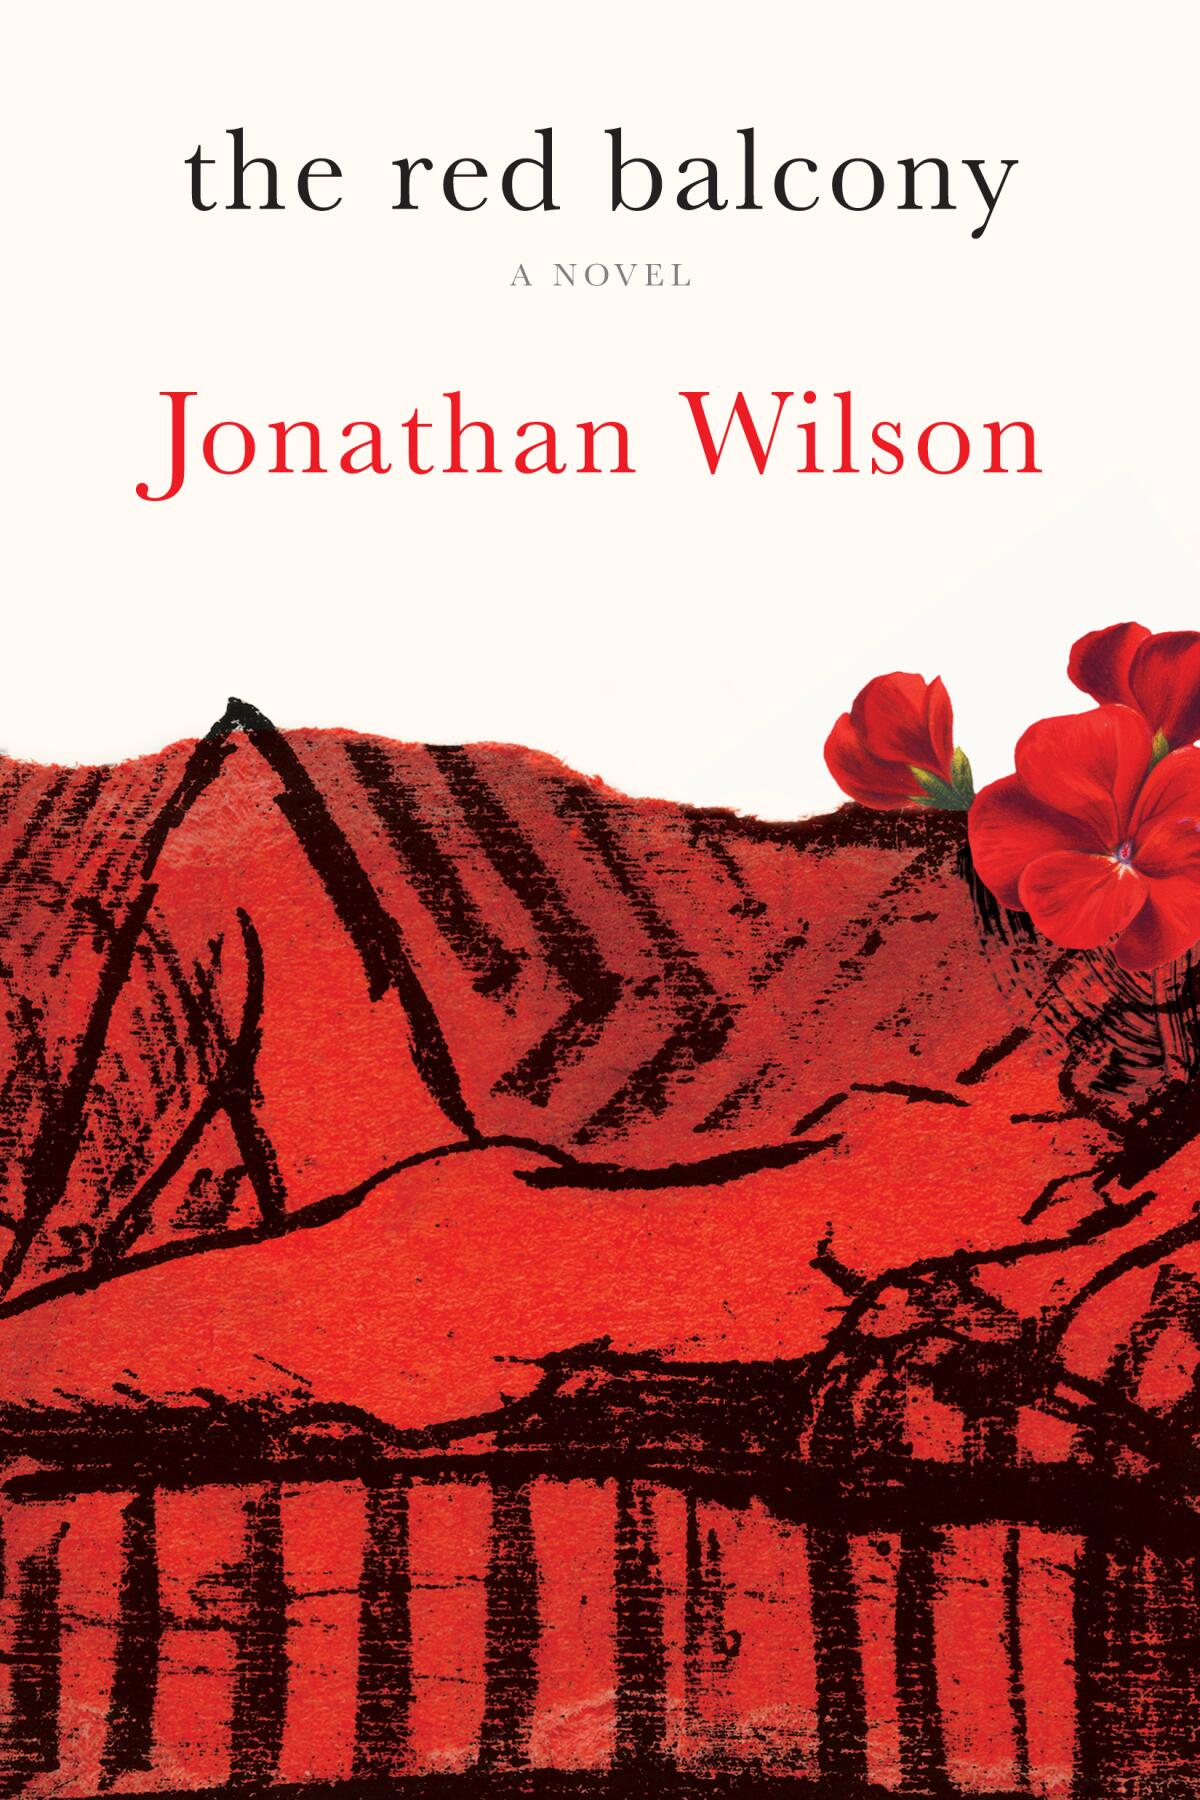 "The Red Balcony" by Jonathan Wilson